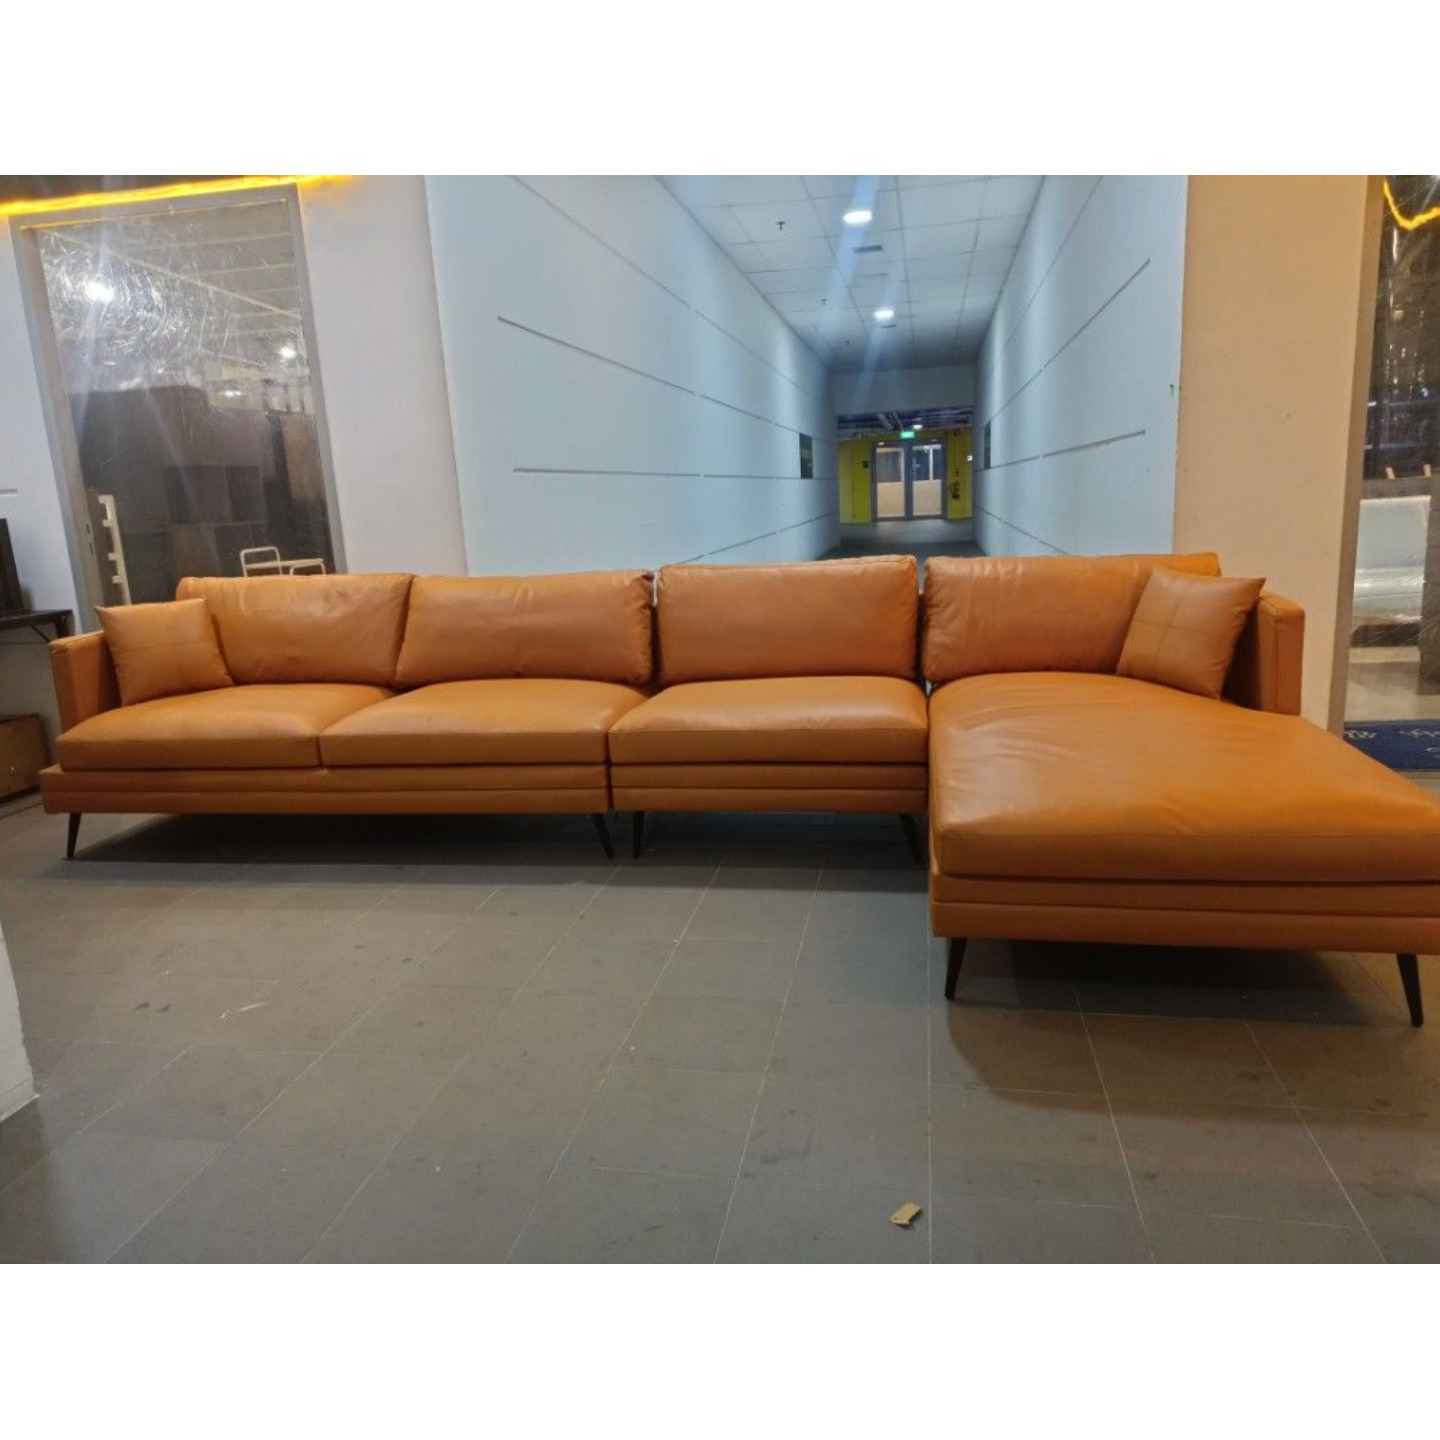 SPECARA 6 Seater Sectional L Shaped Sofa in CAMEL BROWN GENUINE LEATHER